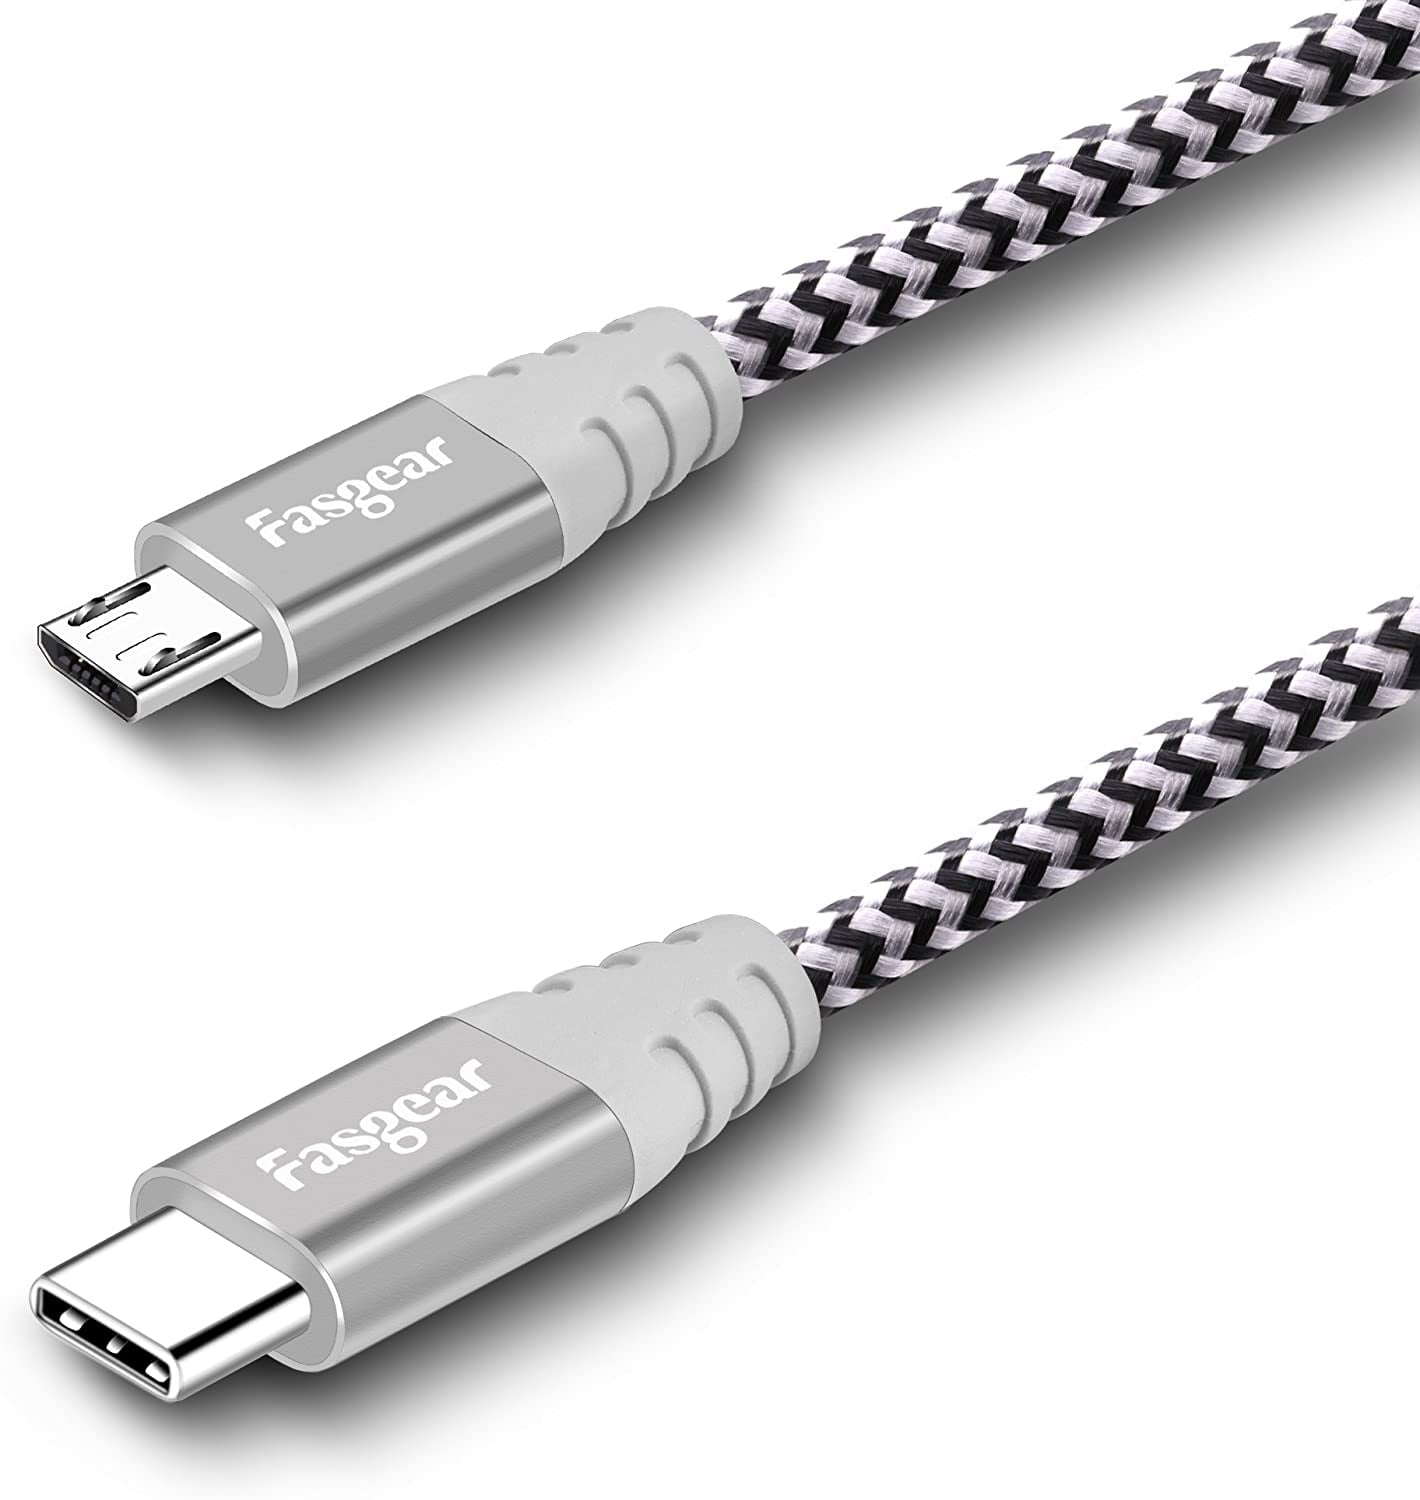 Fasgear USB C to Micro USB Cable 3ft/1m - 1 Pack USB 2.0 Type C to Micro  USB Cord Support Data Sync & Charging Compatible with MacBook Pro/Air|Power